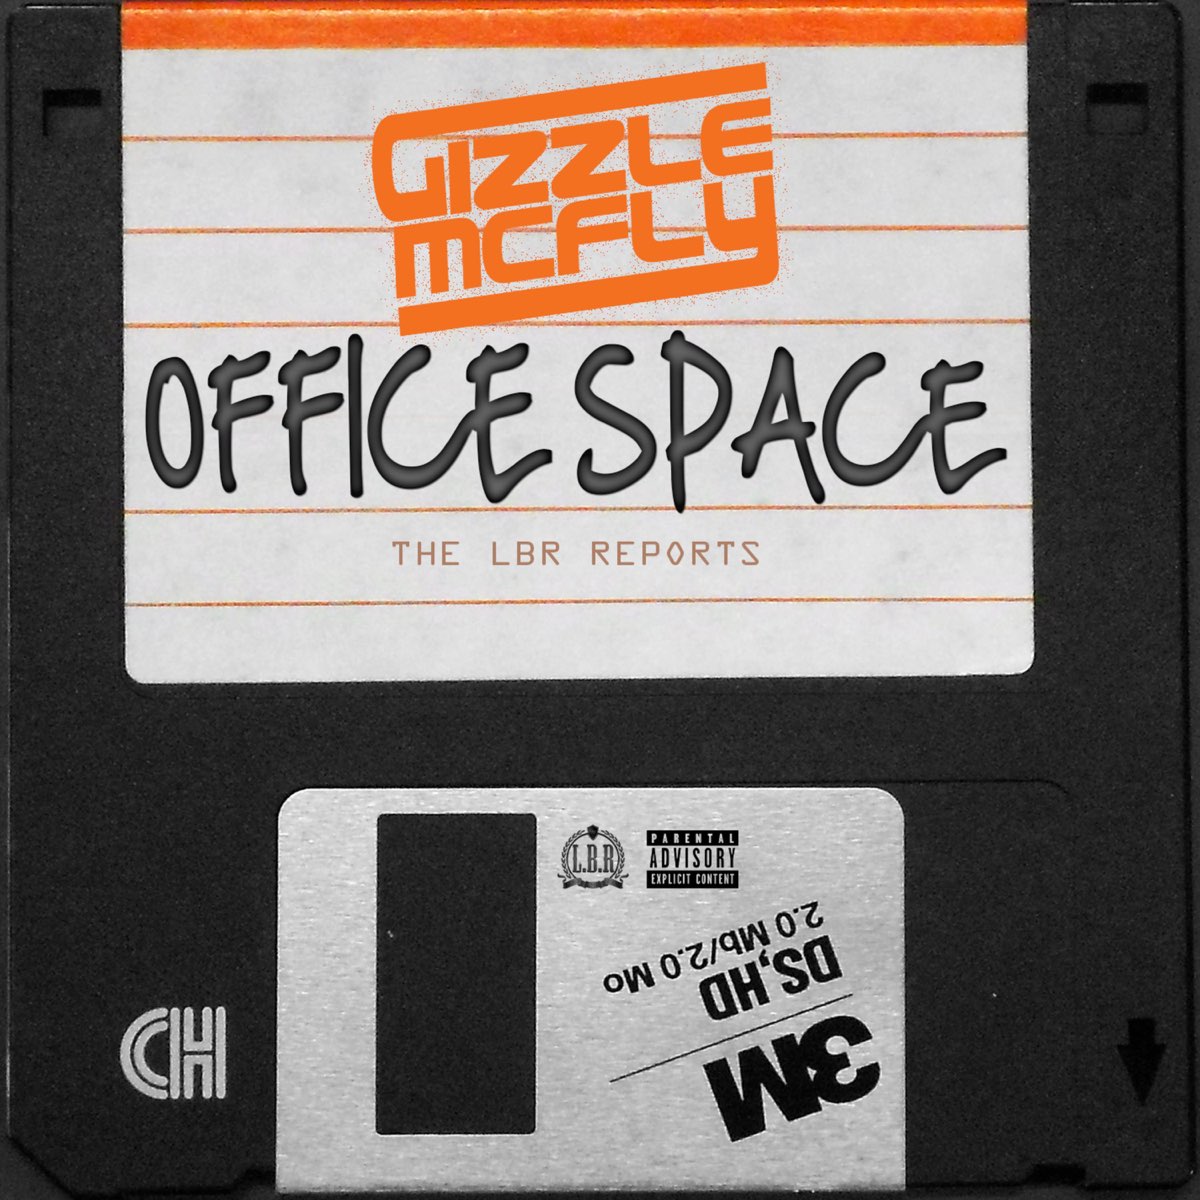 Gizzle McFly - Office Space: The L.B.R. Reports